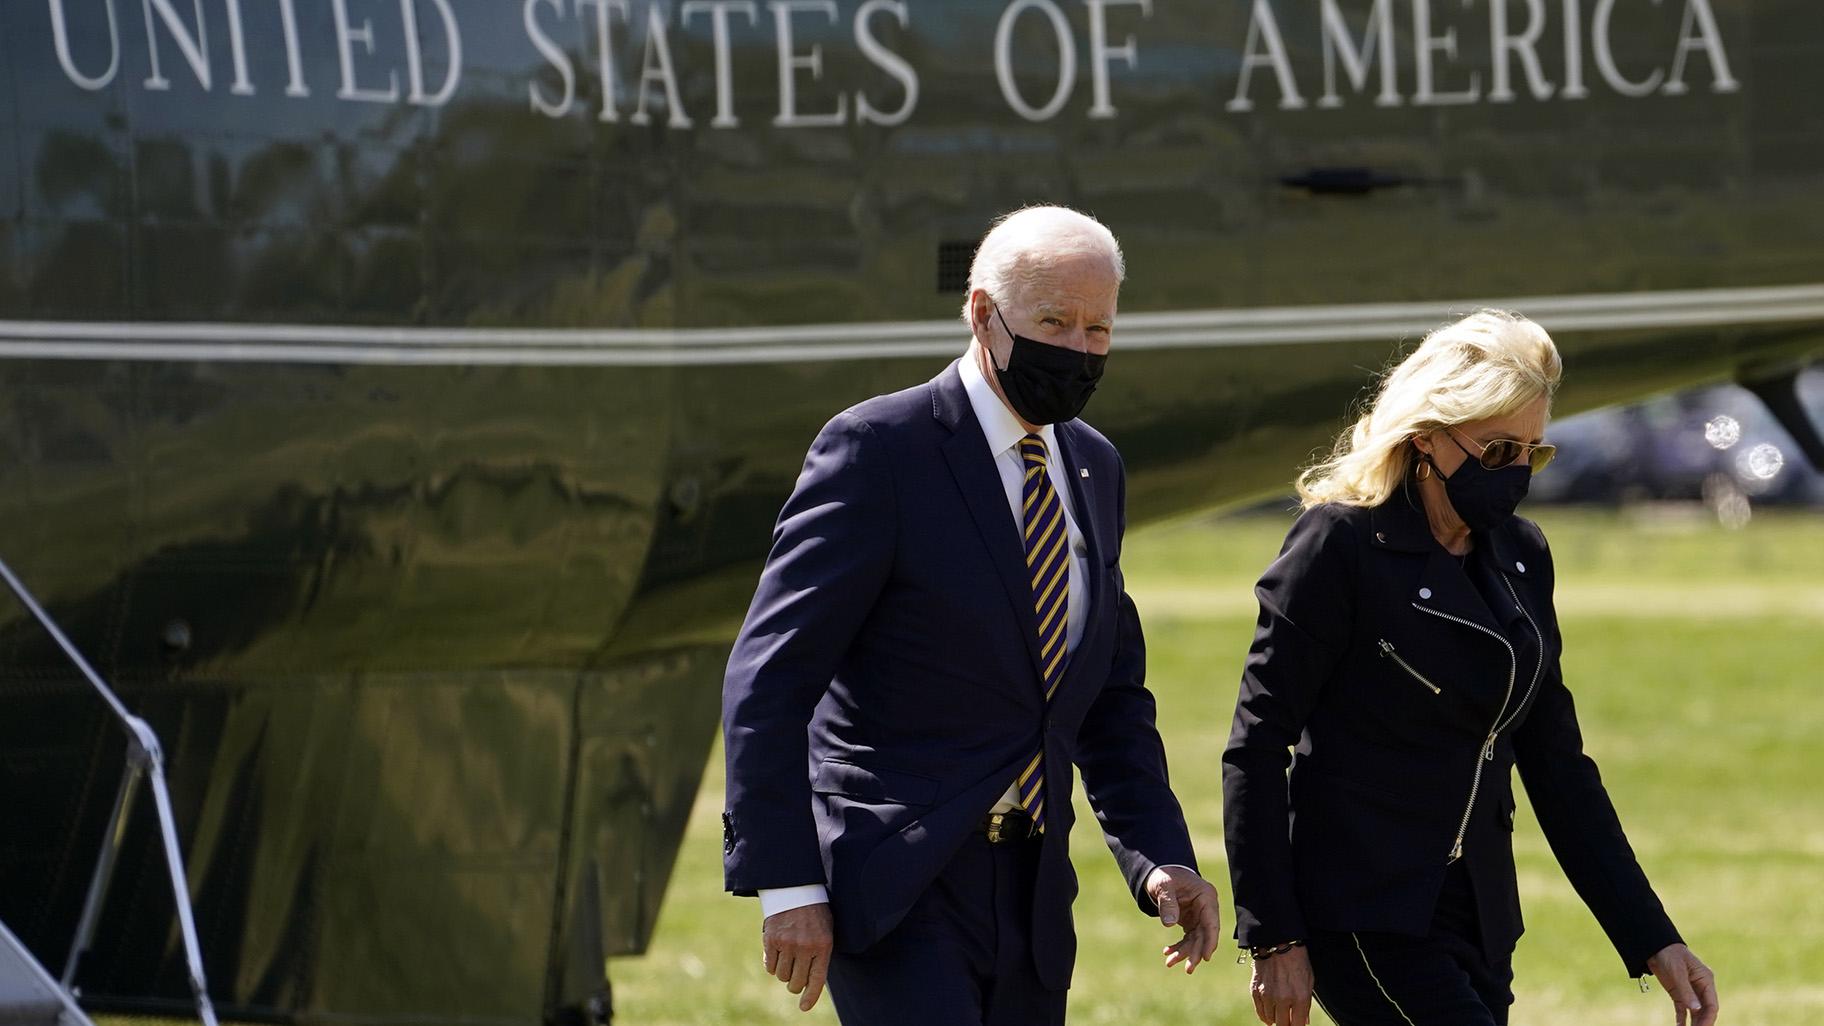 President Joe Biden walks from Marine One with first lady Jill Biden on the Ellipse on the National Mall after spending the weekend at Camp David, Monday, April 5, 2021, in Washington. (AP Photo / Evan Vucci)